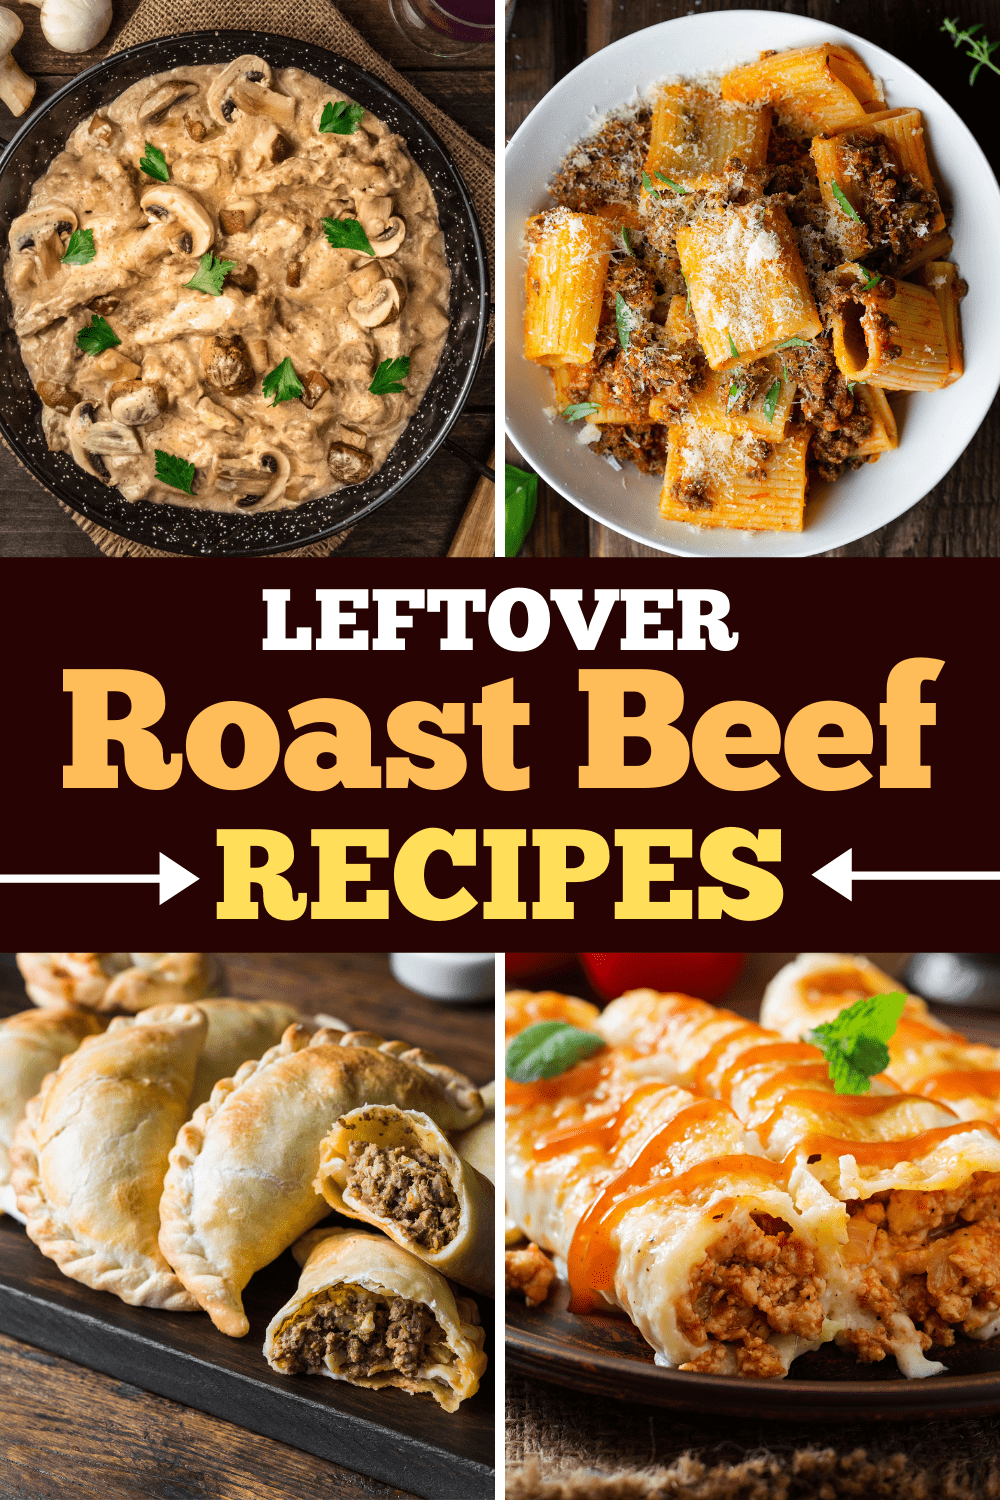 18 Best Leftover Roast Beef Recipes - Insanely Good